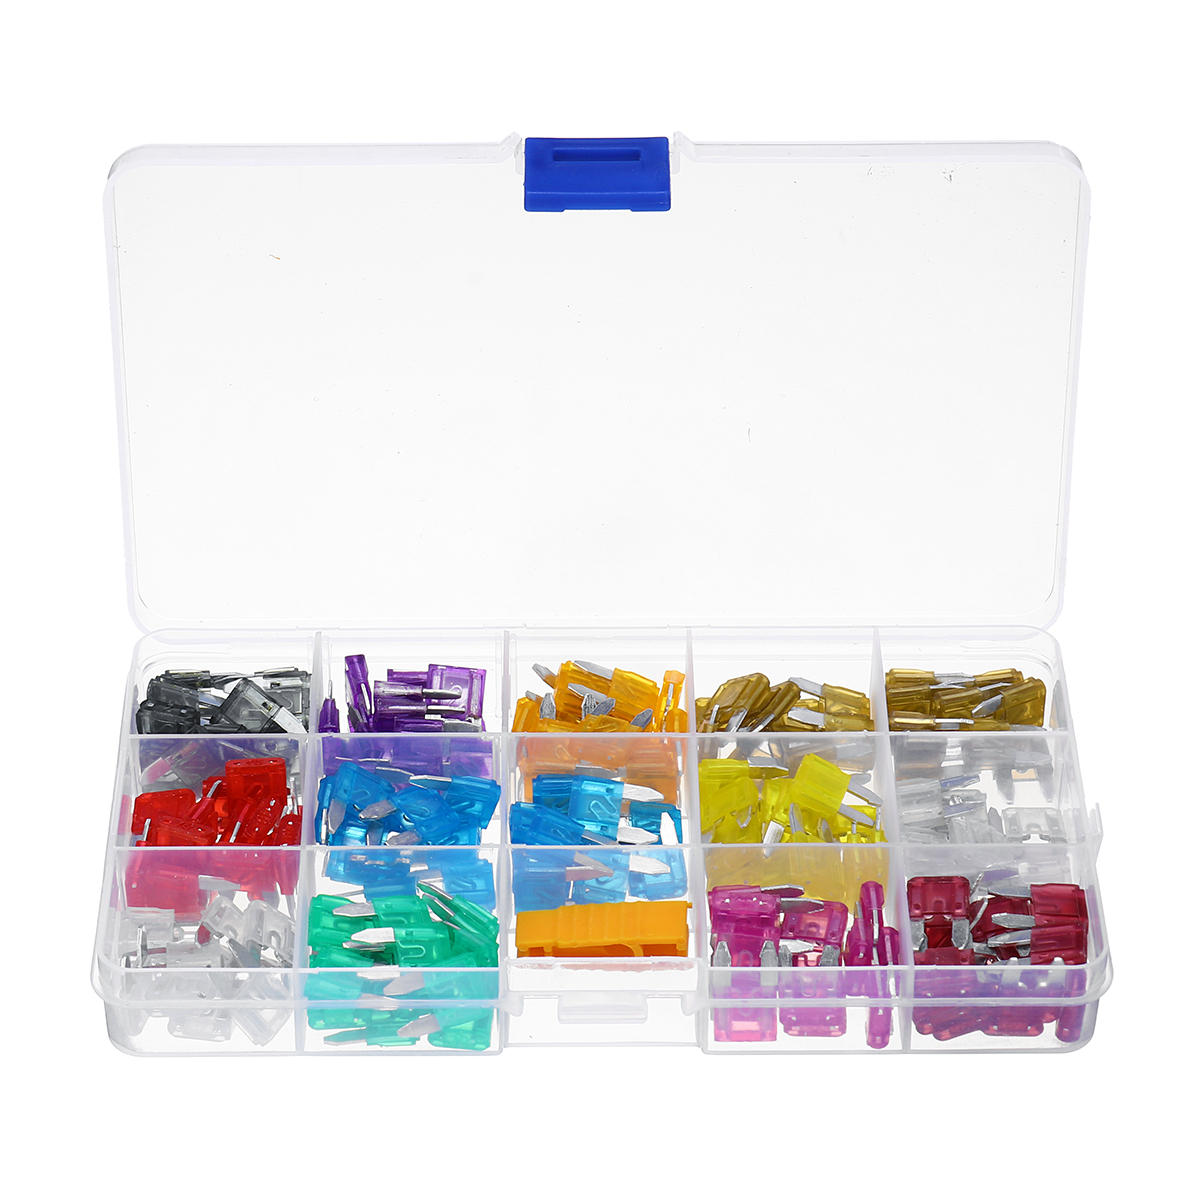 

180Pcs Small Blade Fuse Set Kit 2A 5A 10A 15A 20A 25A 30A 40A APM With Box